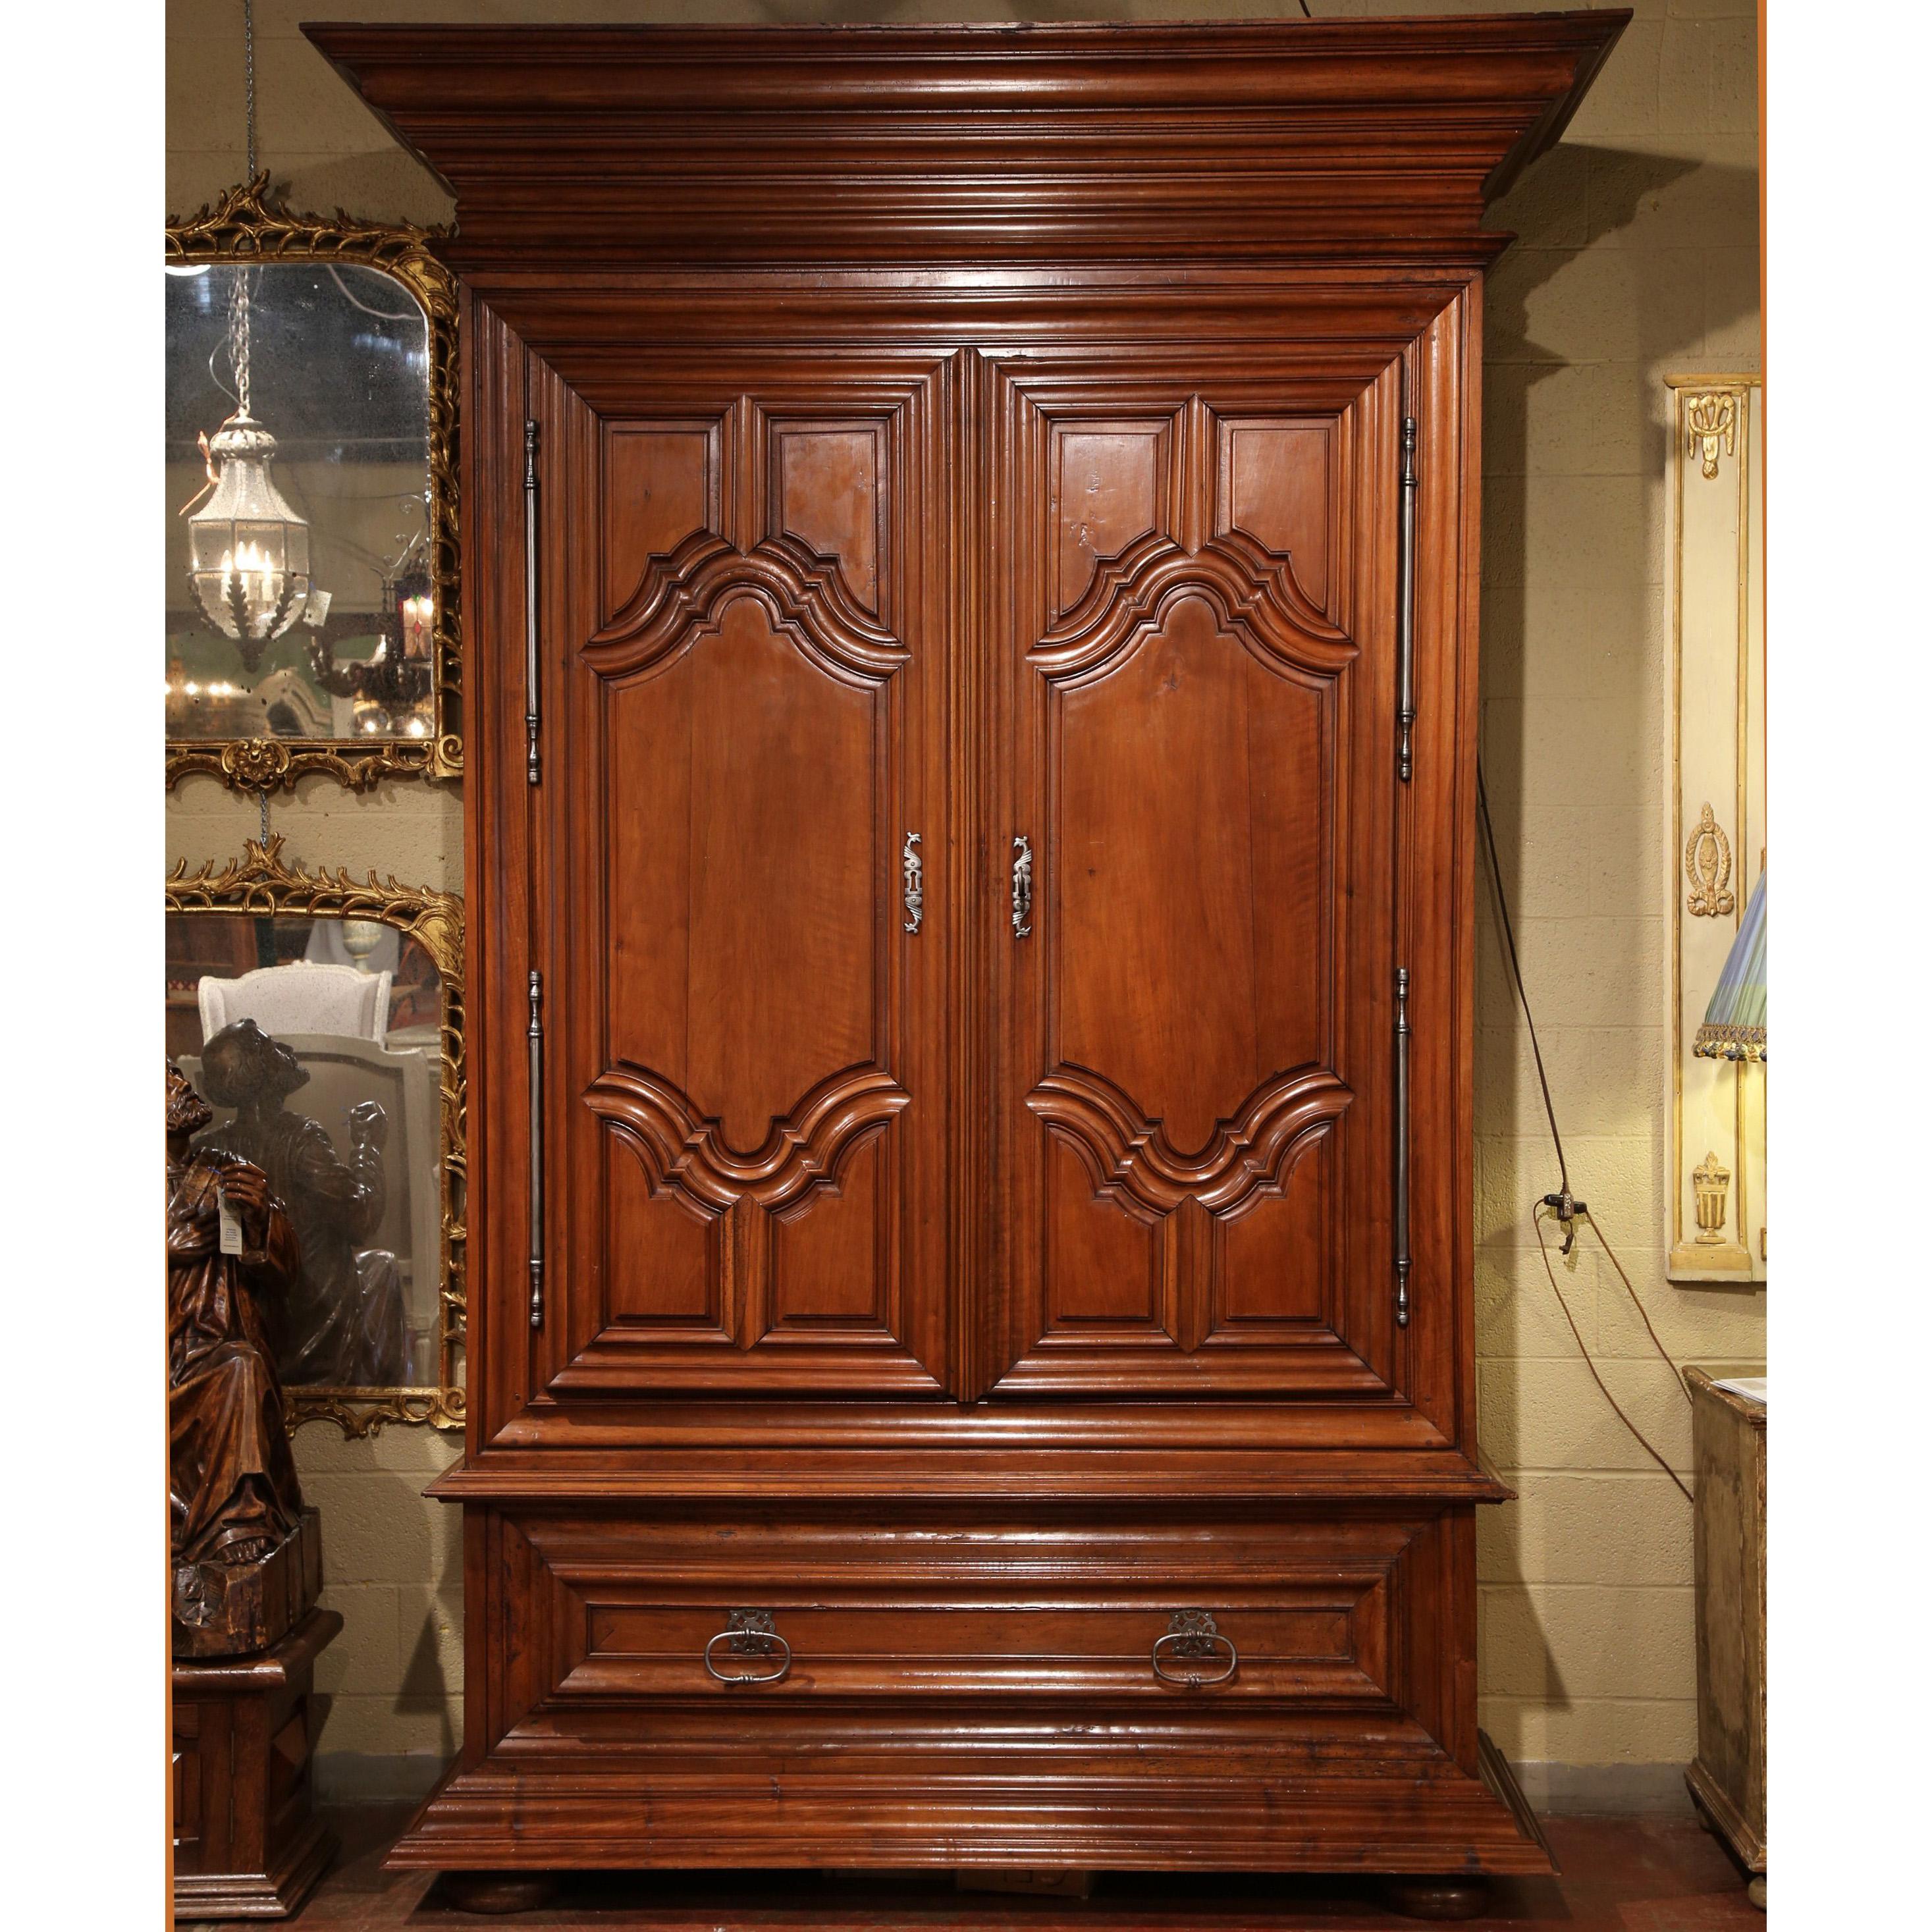 This grand, monumental armoire is derived from the chateaux region of the Loire Valley of France. The region includes notable palaces including Chamborg, Chenonceau, Chevergny, Azay le Rideau, etc. Carved, circa 1760, this fruitwood wardrobe is huge